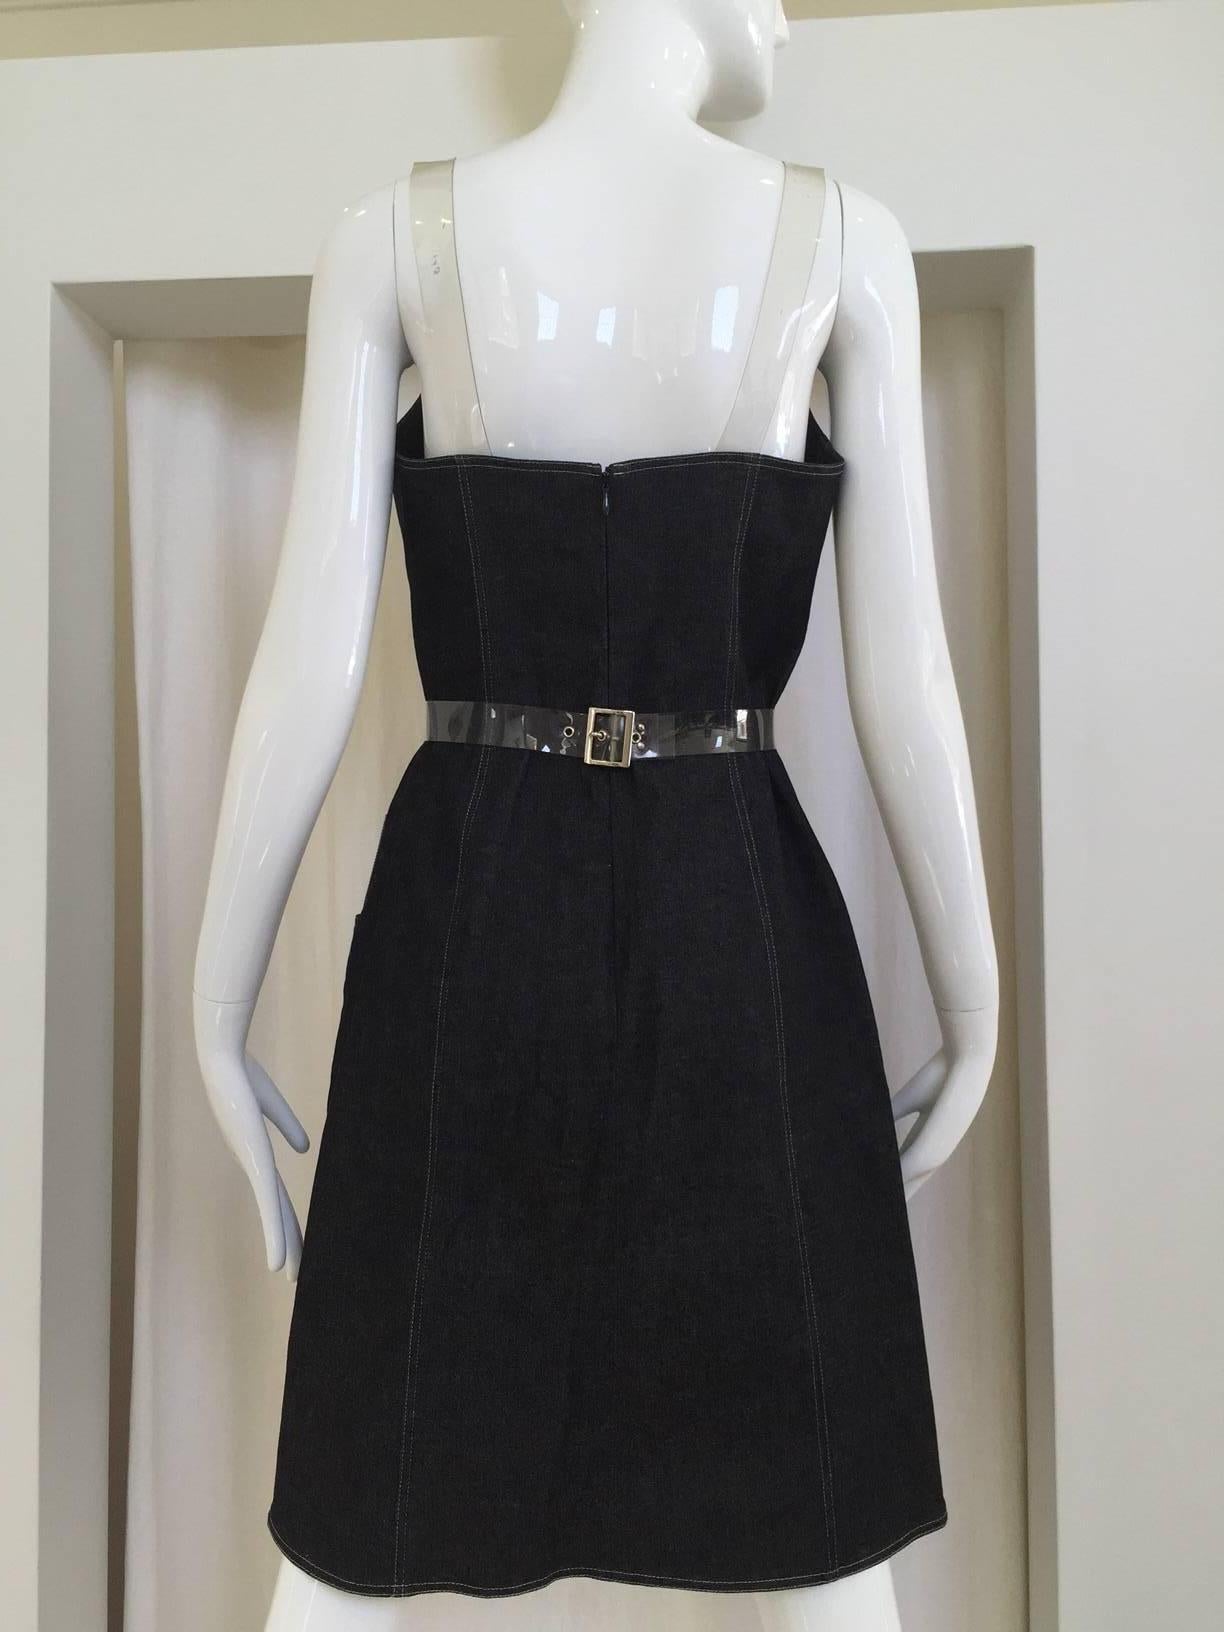 Black  Paco Rabanne denim dress with clear plastic strap and belt